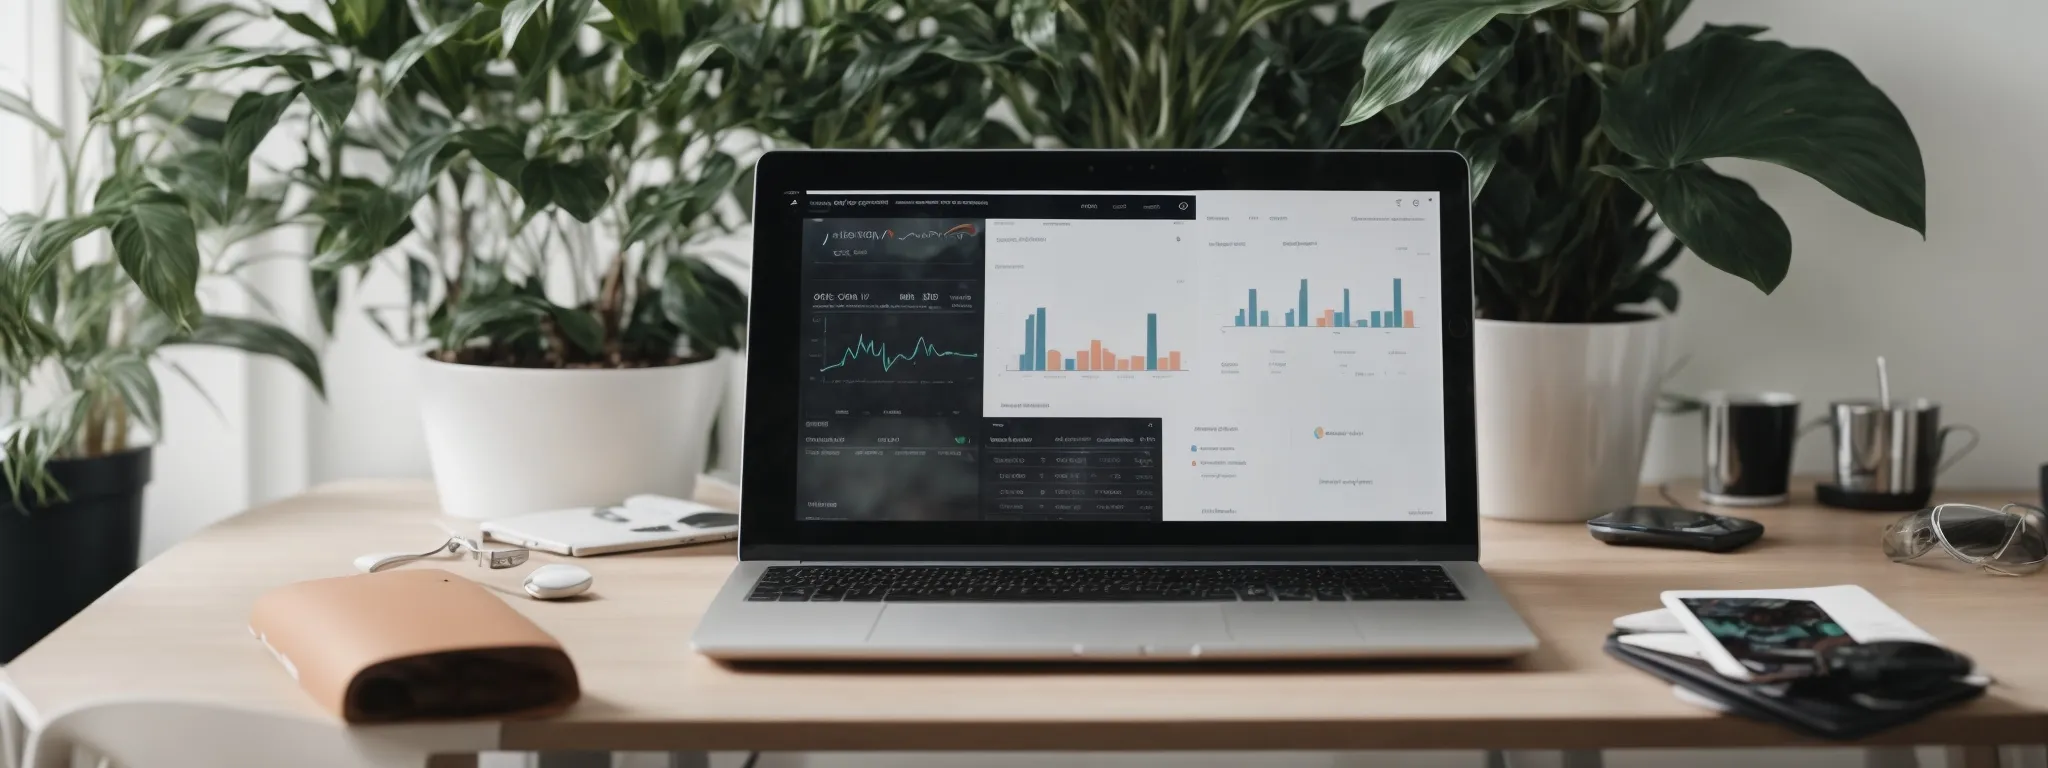 a laptop with an analytics dashboard visible on the screen, situated on a minimalist desk alongside a potted plant.